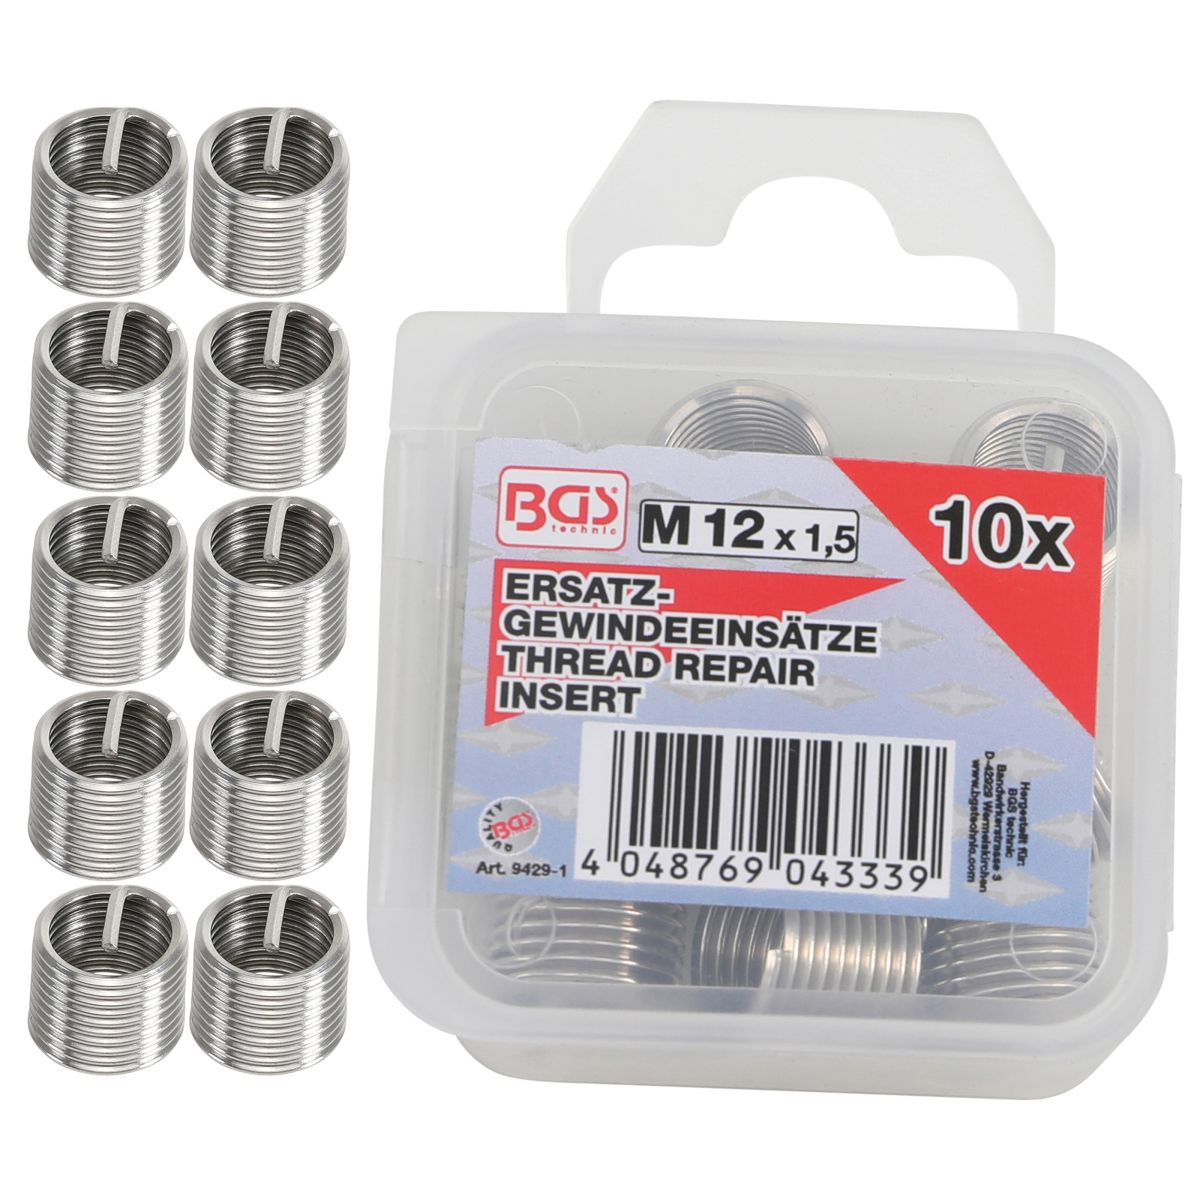 Replacement Thread Inserts | M12 x 1.5 mm | 10 pcs.